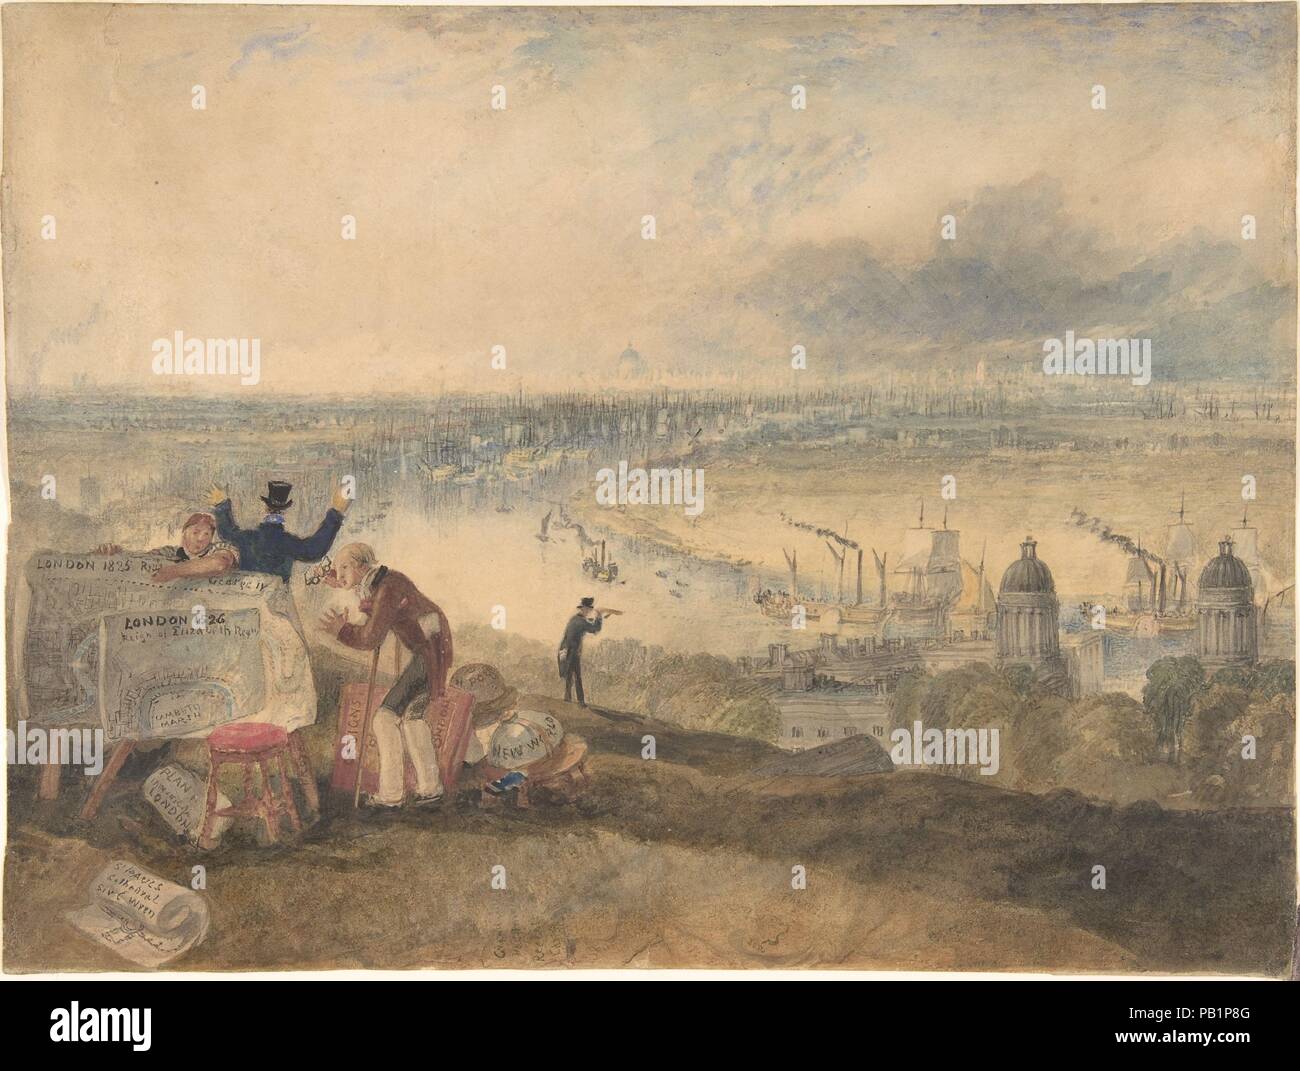 View of London from Greenwich. Artist: Joseph Mallord William Turner (British, London 1775-1851 London). Dimensions: sheet: 8 3/8 x 11 in. (21.3 x 28 cm). Date: 1825.  Turner here offers a panorama of greater London as seen from Greenwich Park, looking down towards the Naval Hospital designed by Sir Christopher Wren, the river Thames, and the distant city. The foreground is littered with maps and globes, with a woman holding up two plans for a naval pensioner with spectacles and crutches to inspect-a reference to England's past. Slightly behind, a man dressed in a fashionably tall top hat and  Stock Photo